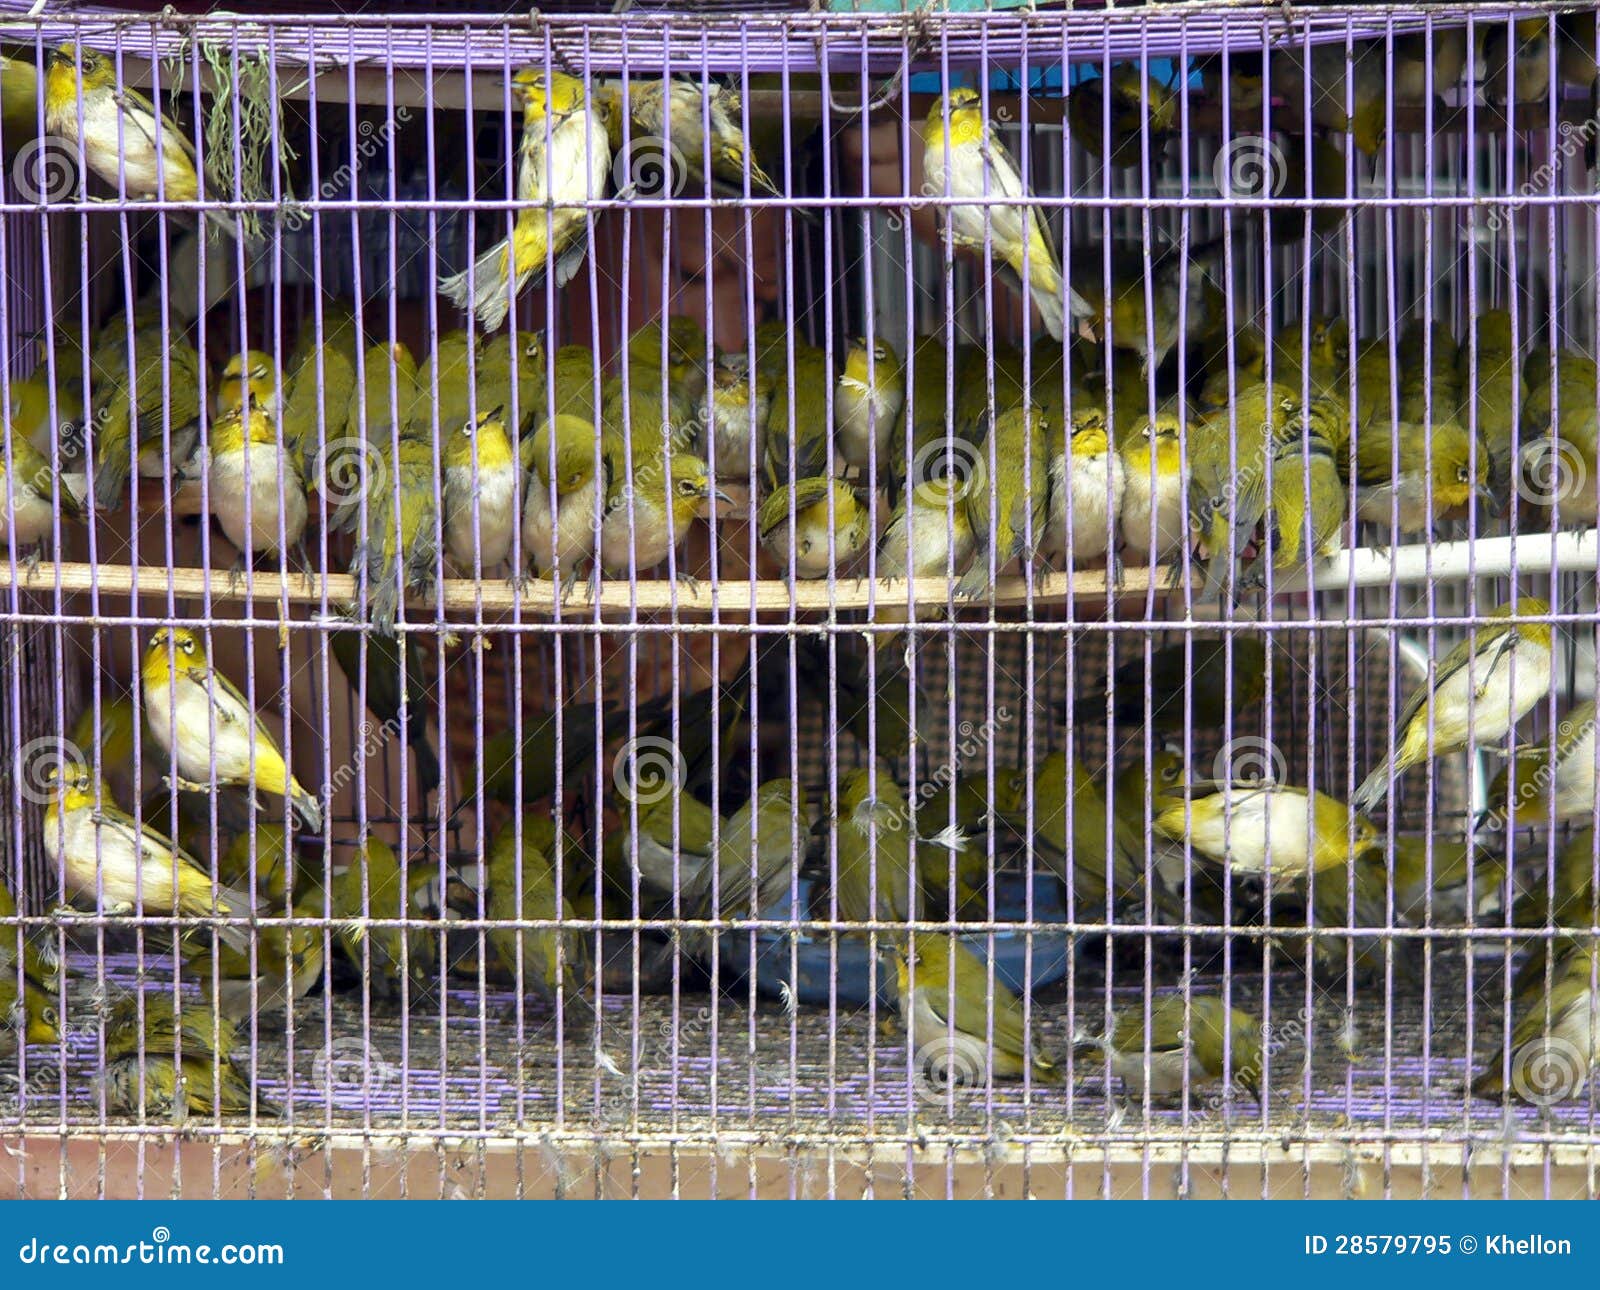 birds in a cage